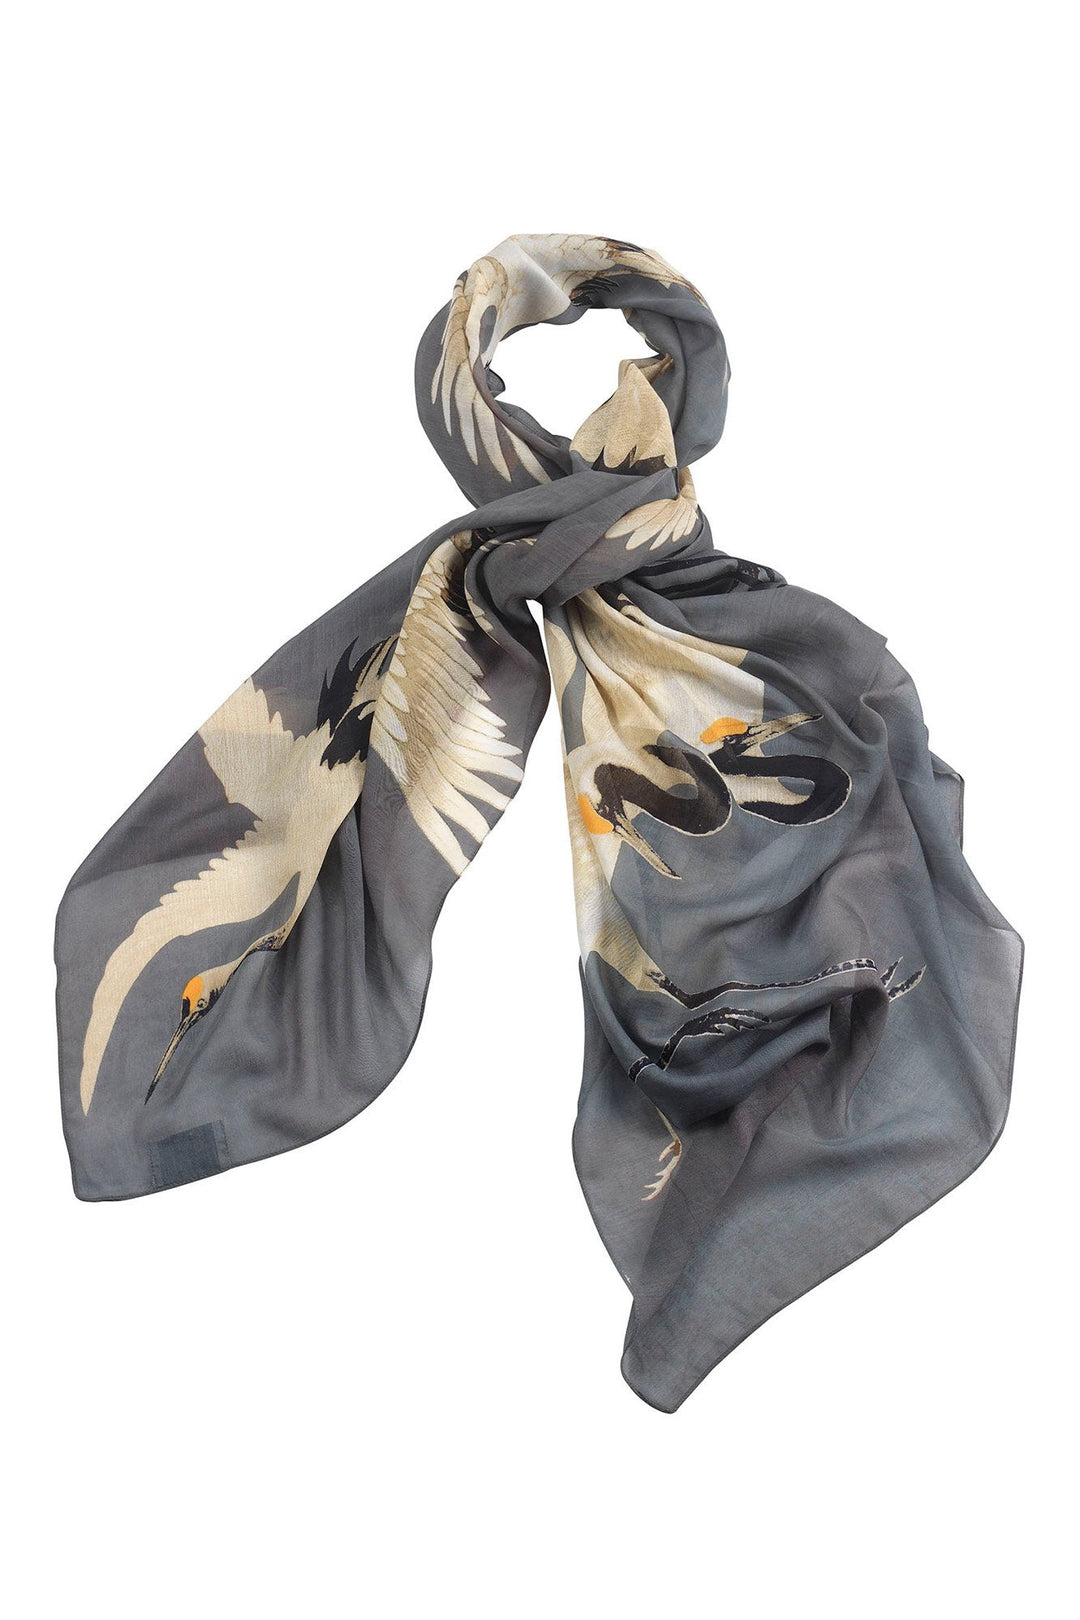 One Hundred Stars Stork Crane Slate Grey Scarf - this scarf is great to adding warmth in the winter or great for wearing pashmina style in the summer. 